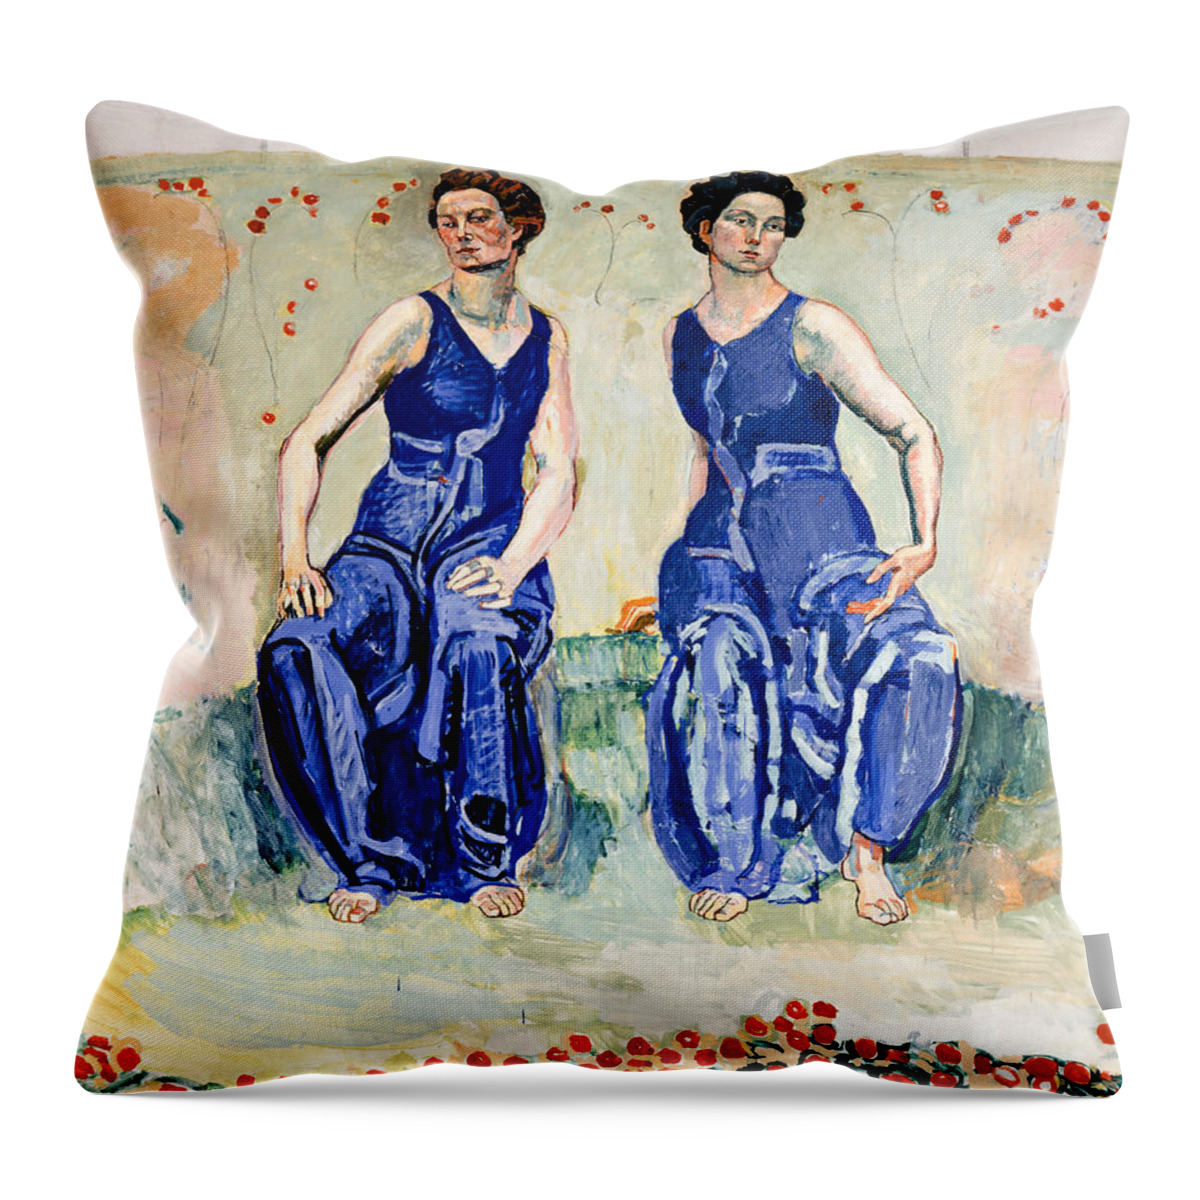 19th Century Art Throw Pillow featuring the painting The Sacred Hour, 1902-1916 by Ferdinand Hodler